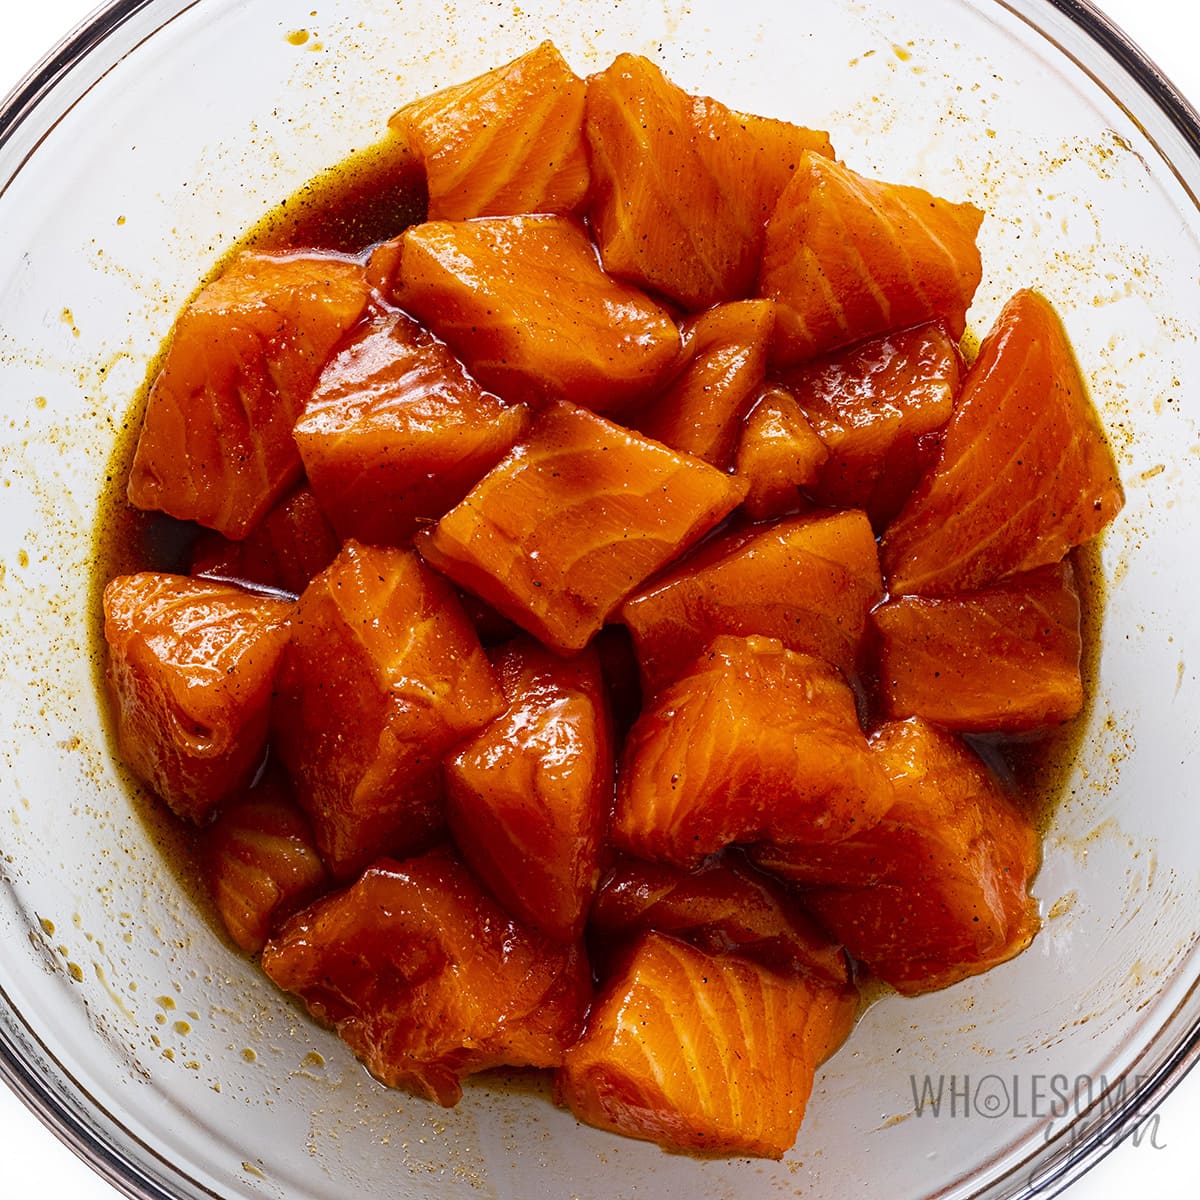 Cut salmon pieces in a bowl marinating.